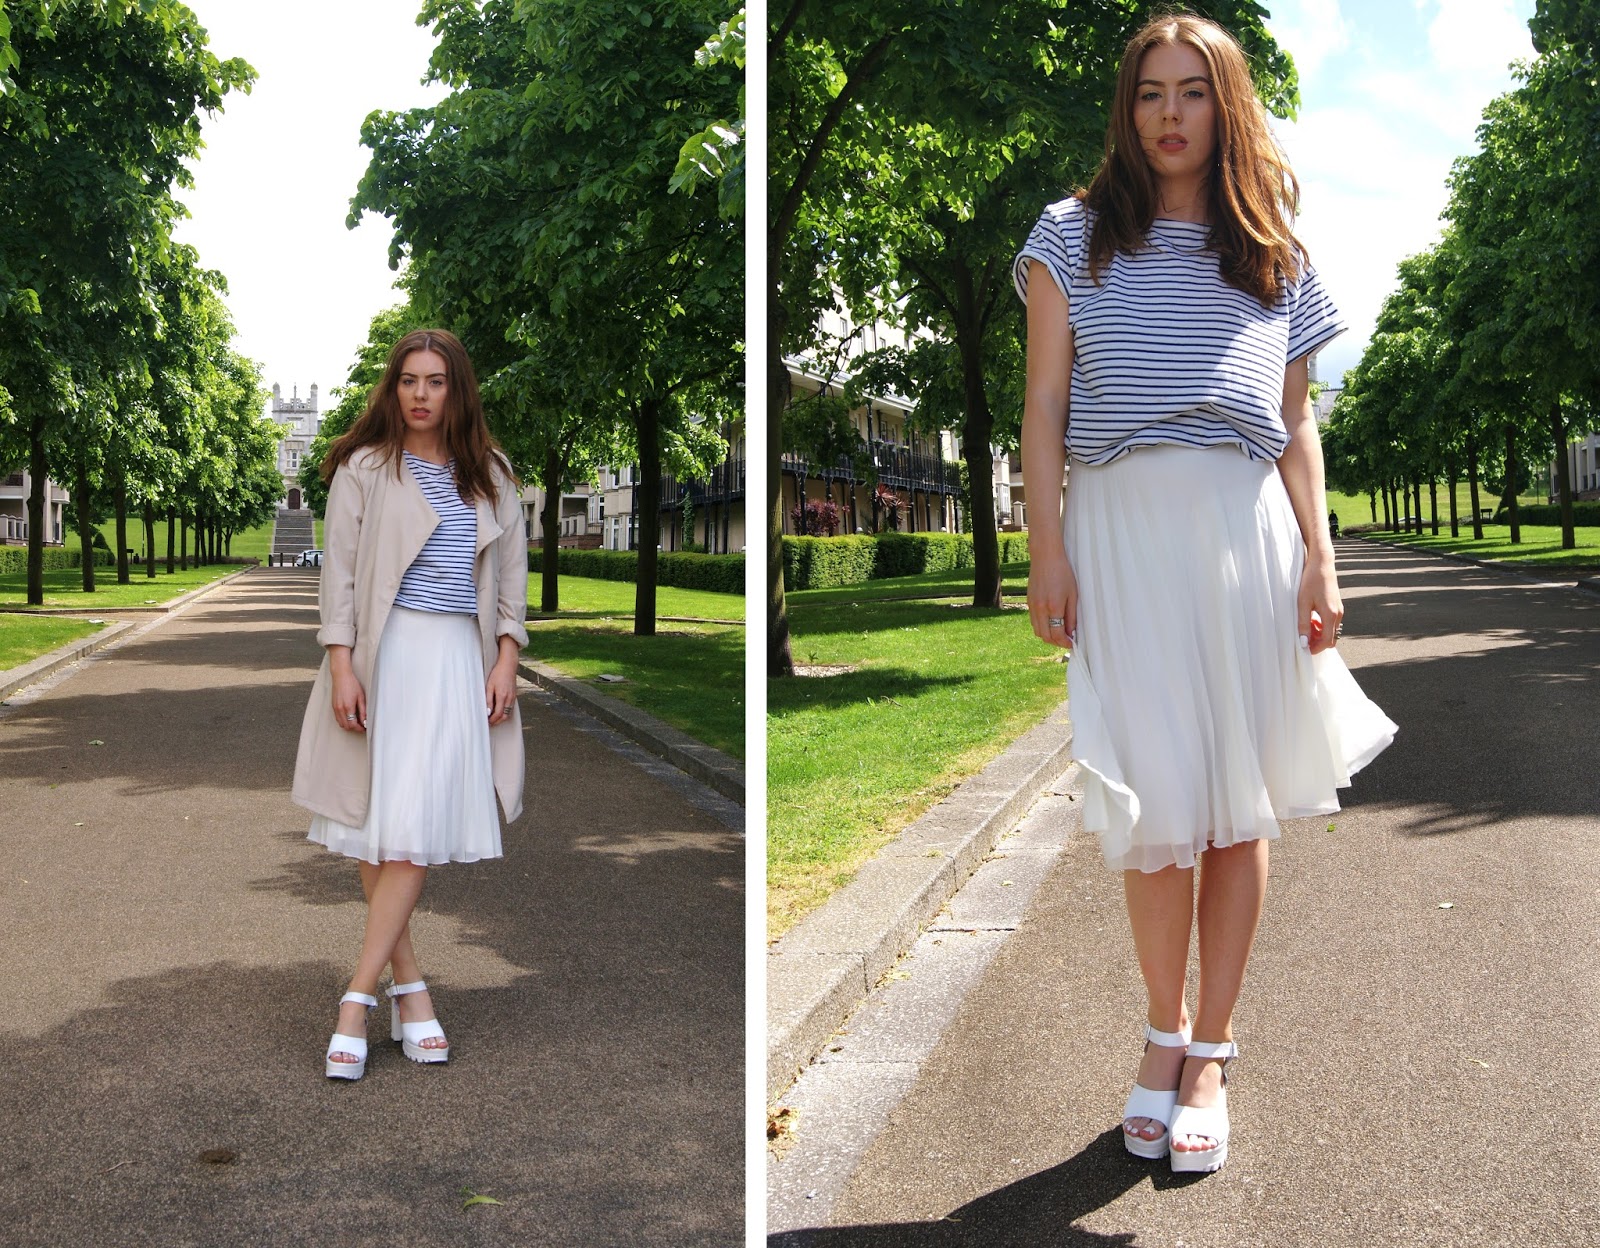 OUTFIT / BOAT PARTY | THE GOODOWL | UK FASHION & LIFESTYLE BLOG